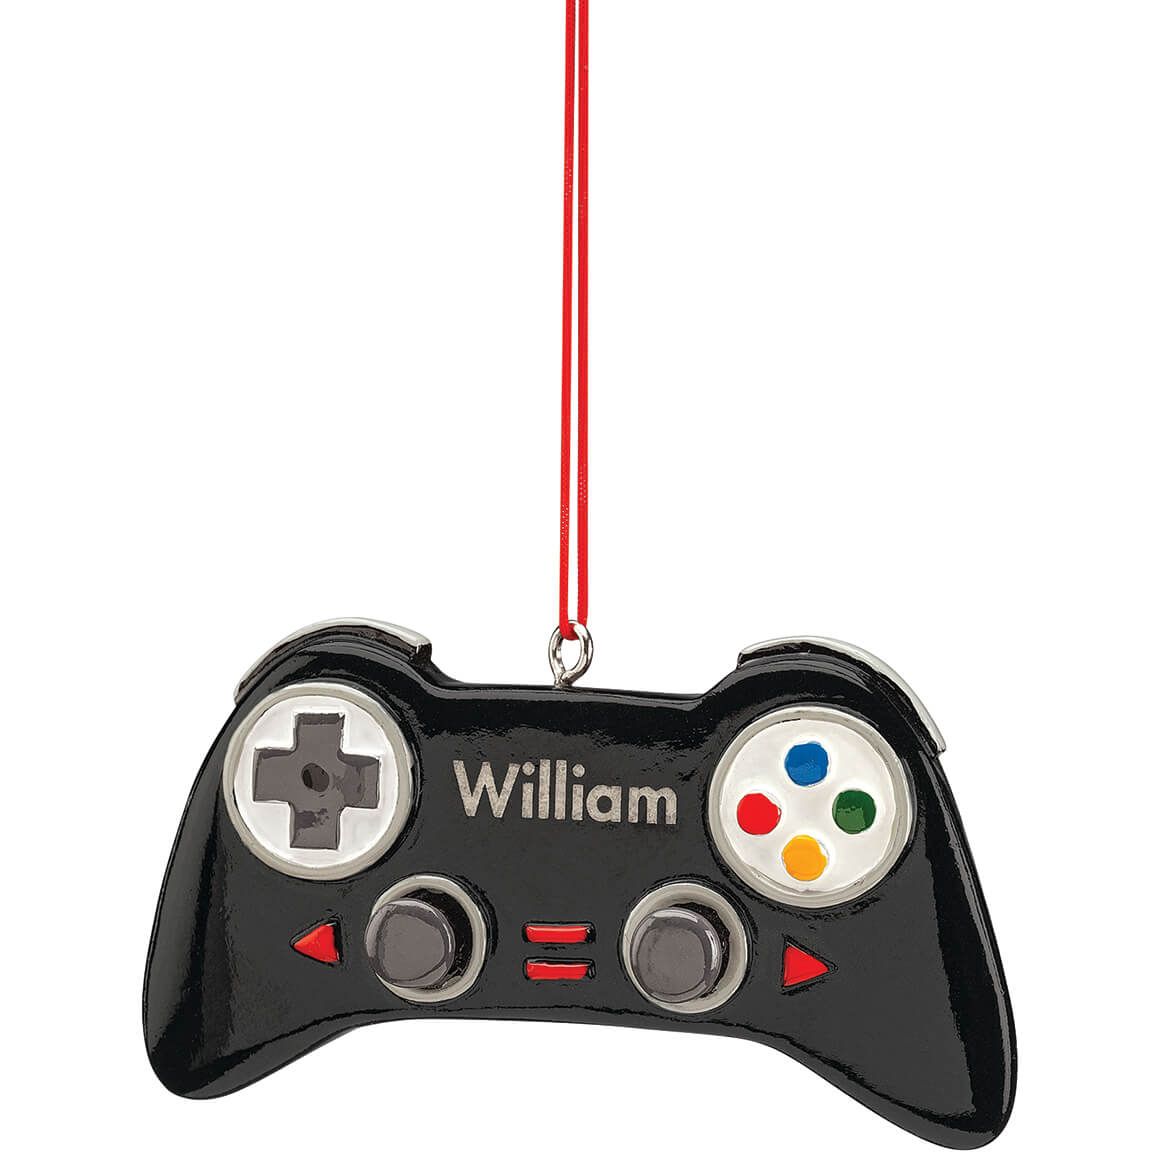 Personalized Video Game Controller Ornament + '-' + 352849